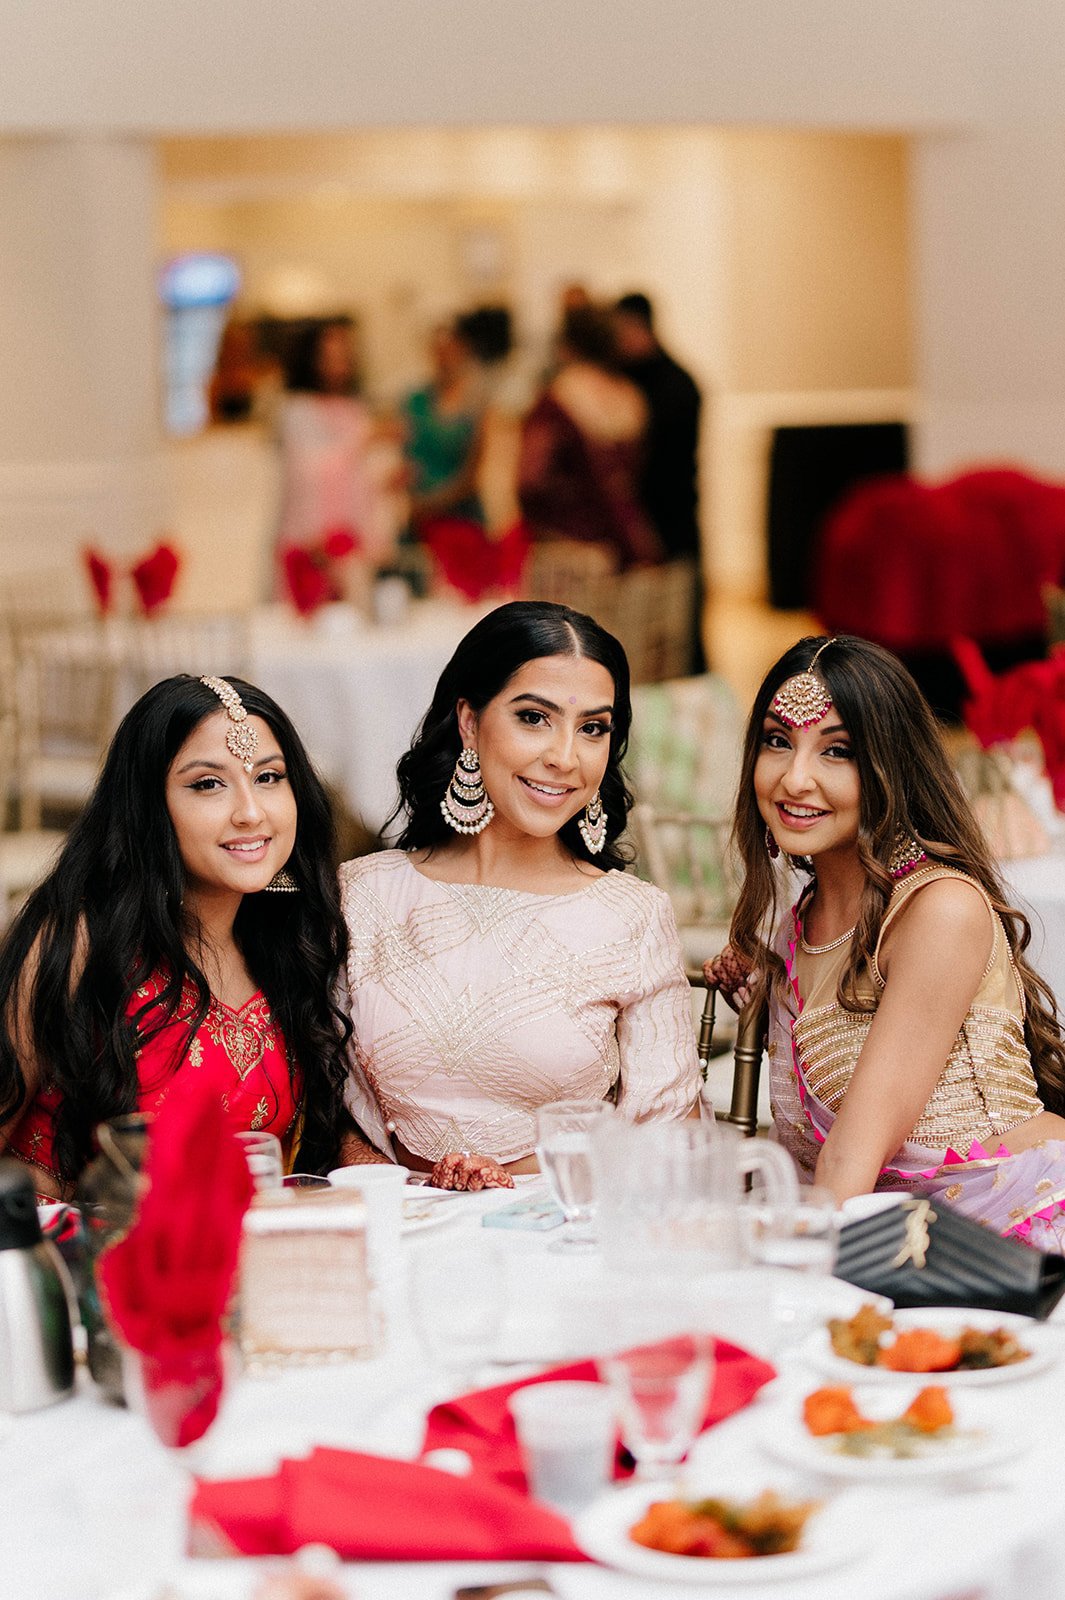 A bride smiles and poses with her friends during a mayian banquet in Surrey BC 